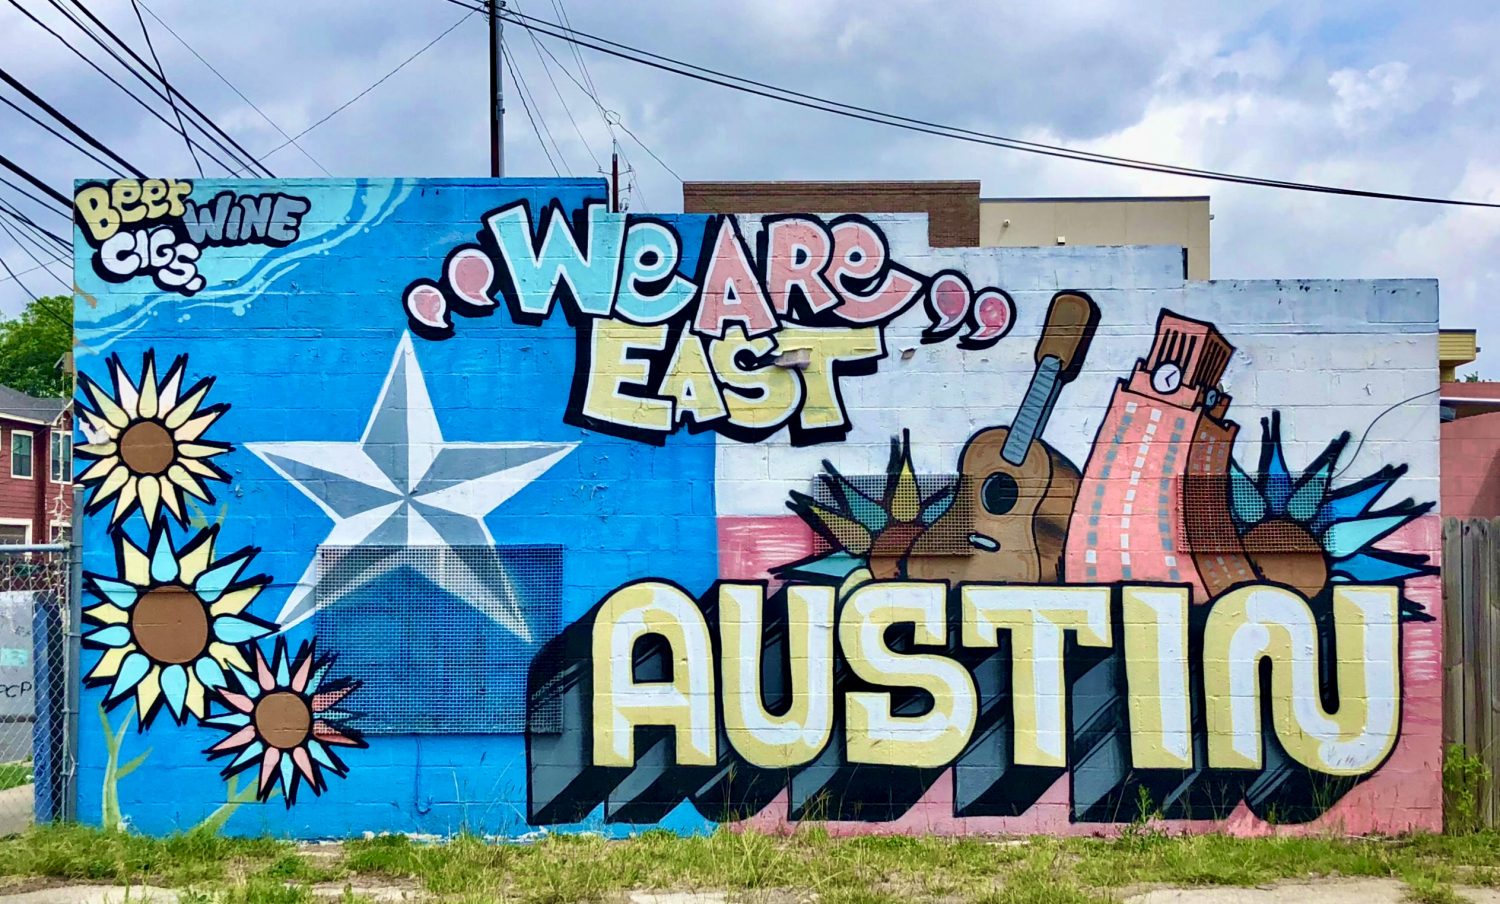 Image of street mural that says "We are East Austin"